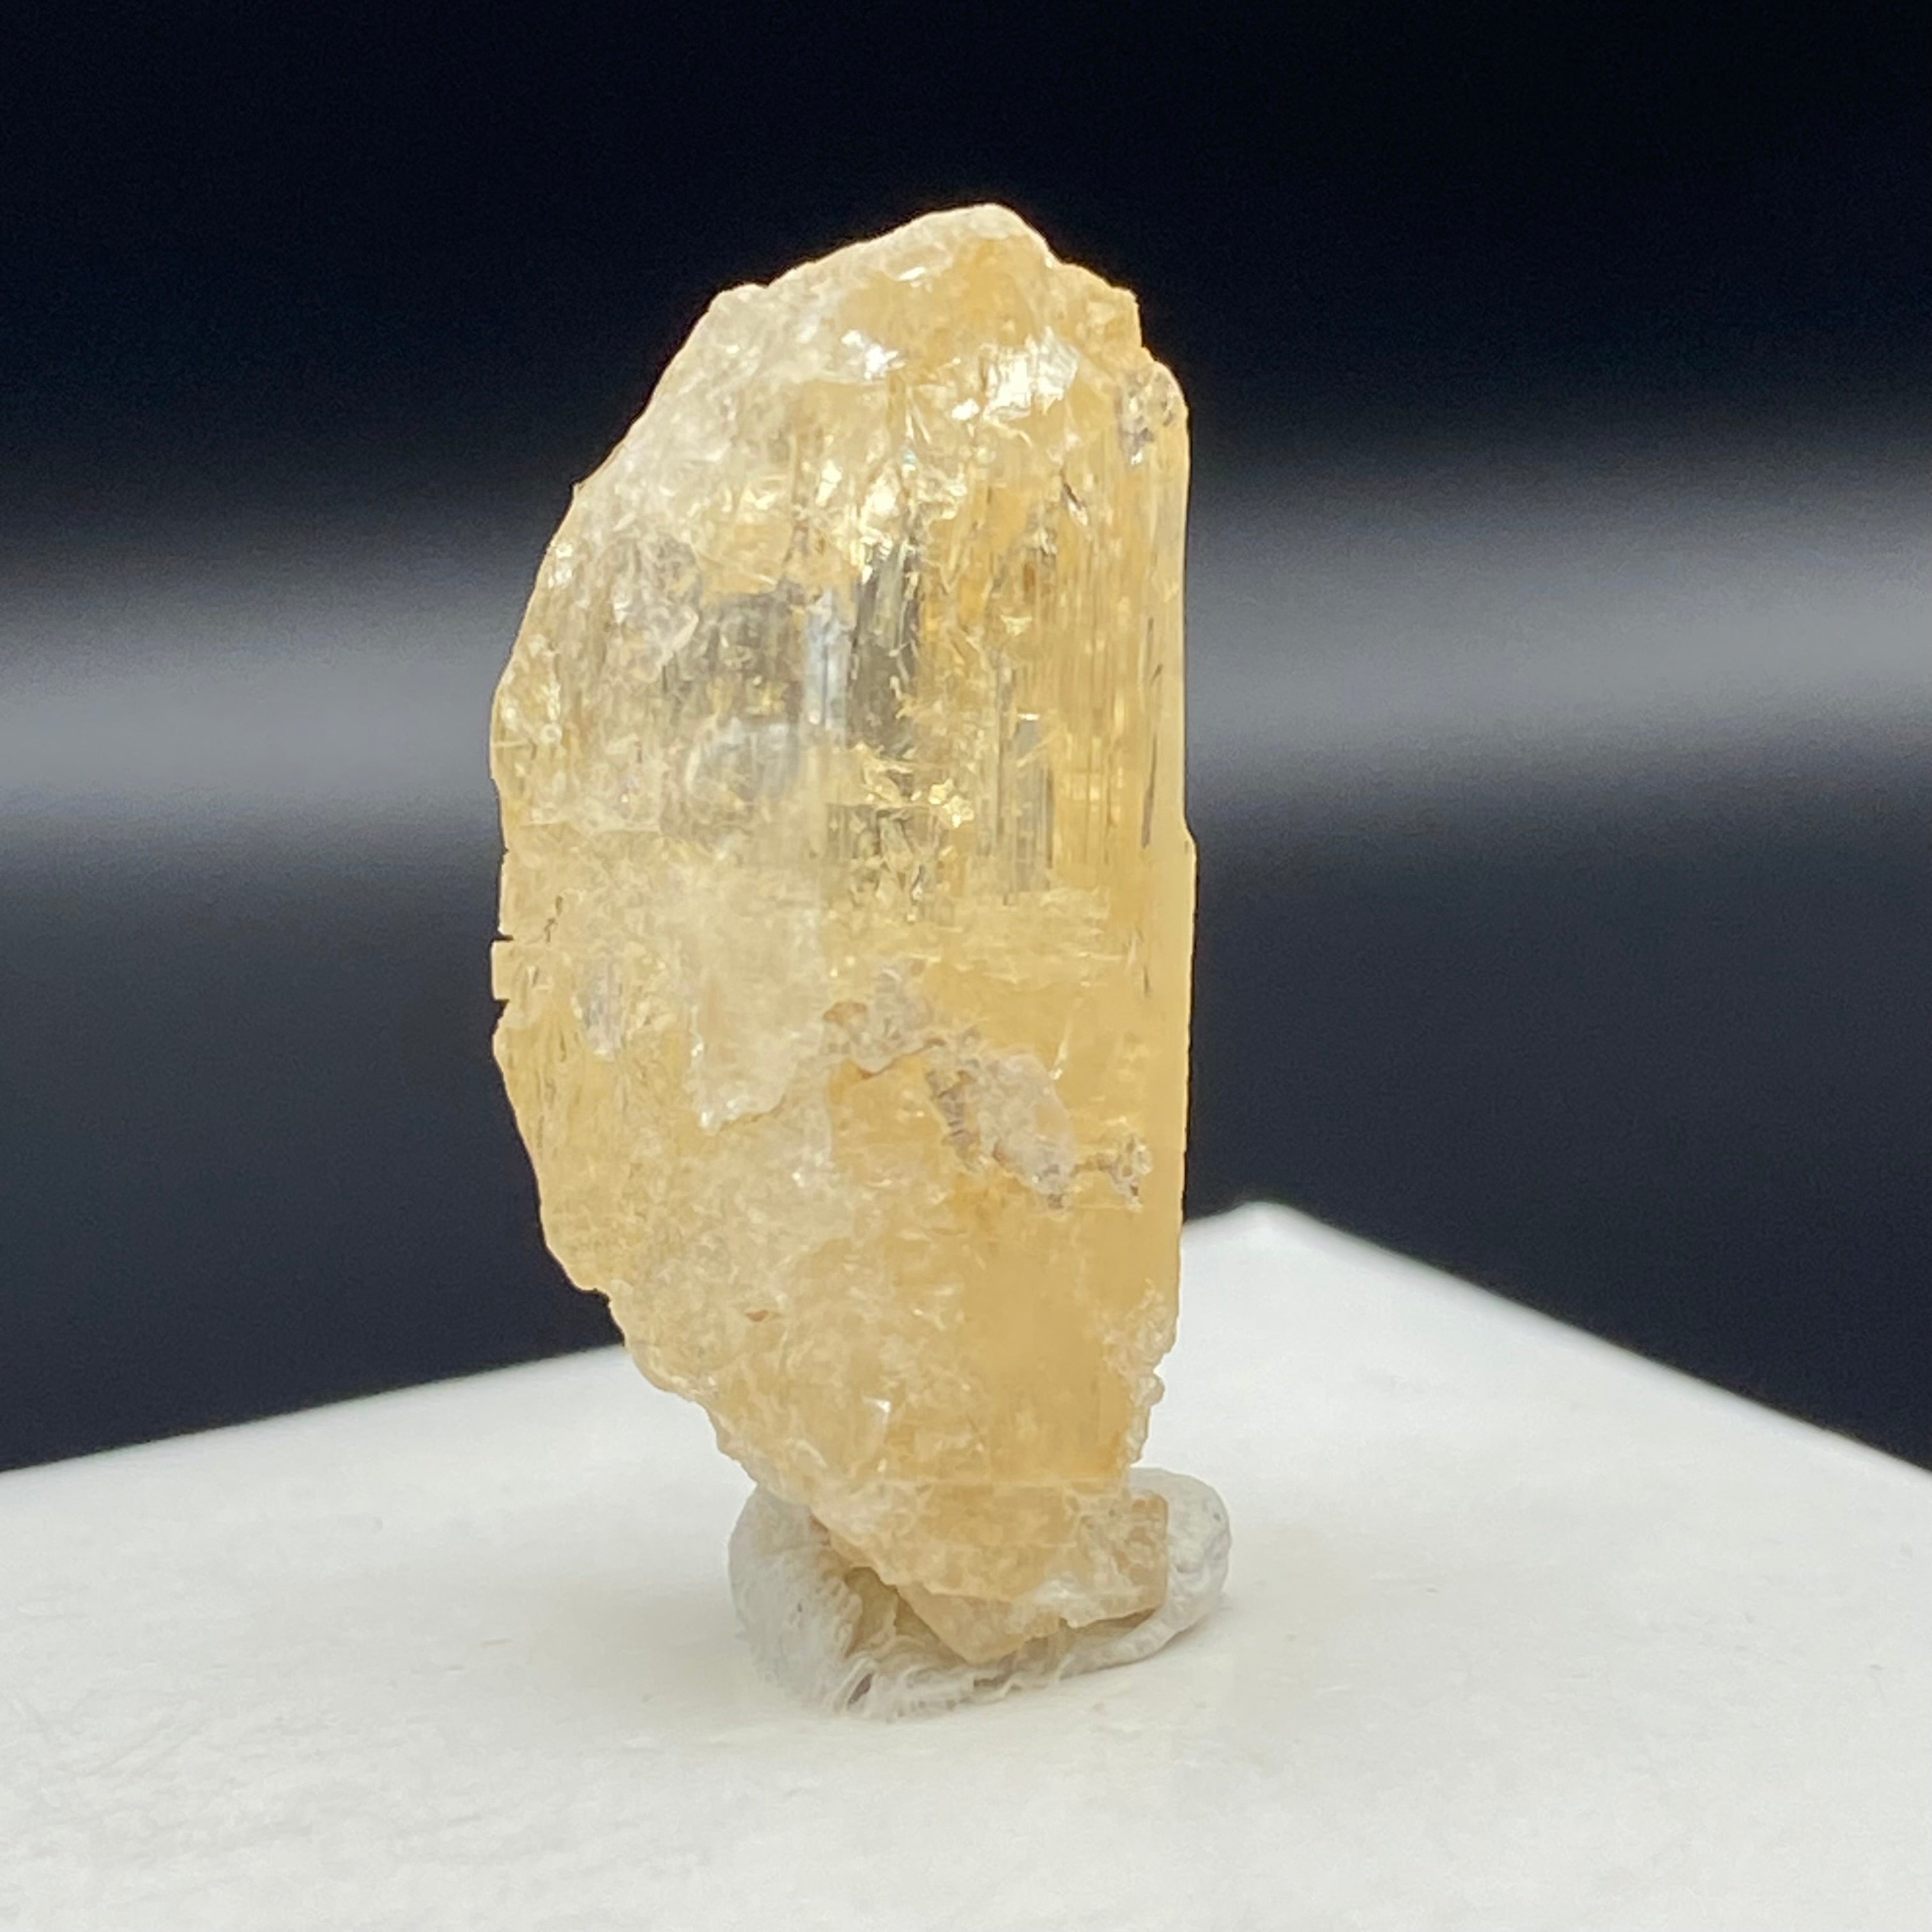 Imperial Topaz Non-Terminated Crystal - 150